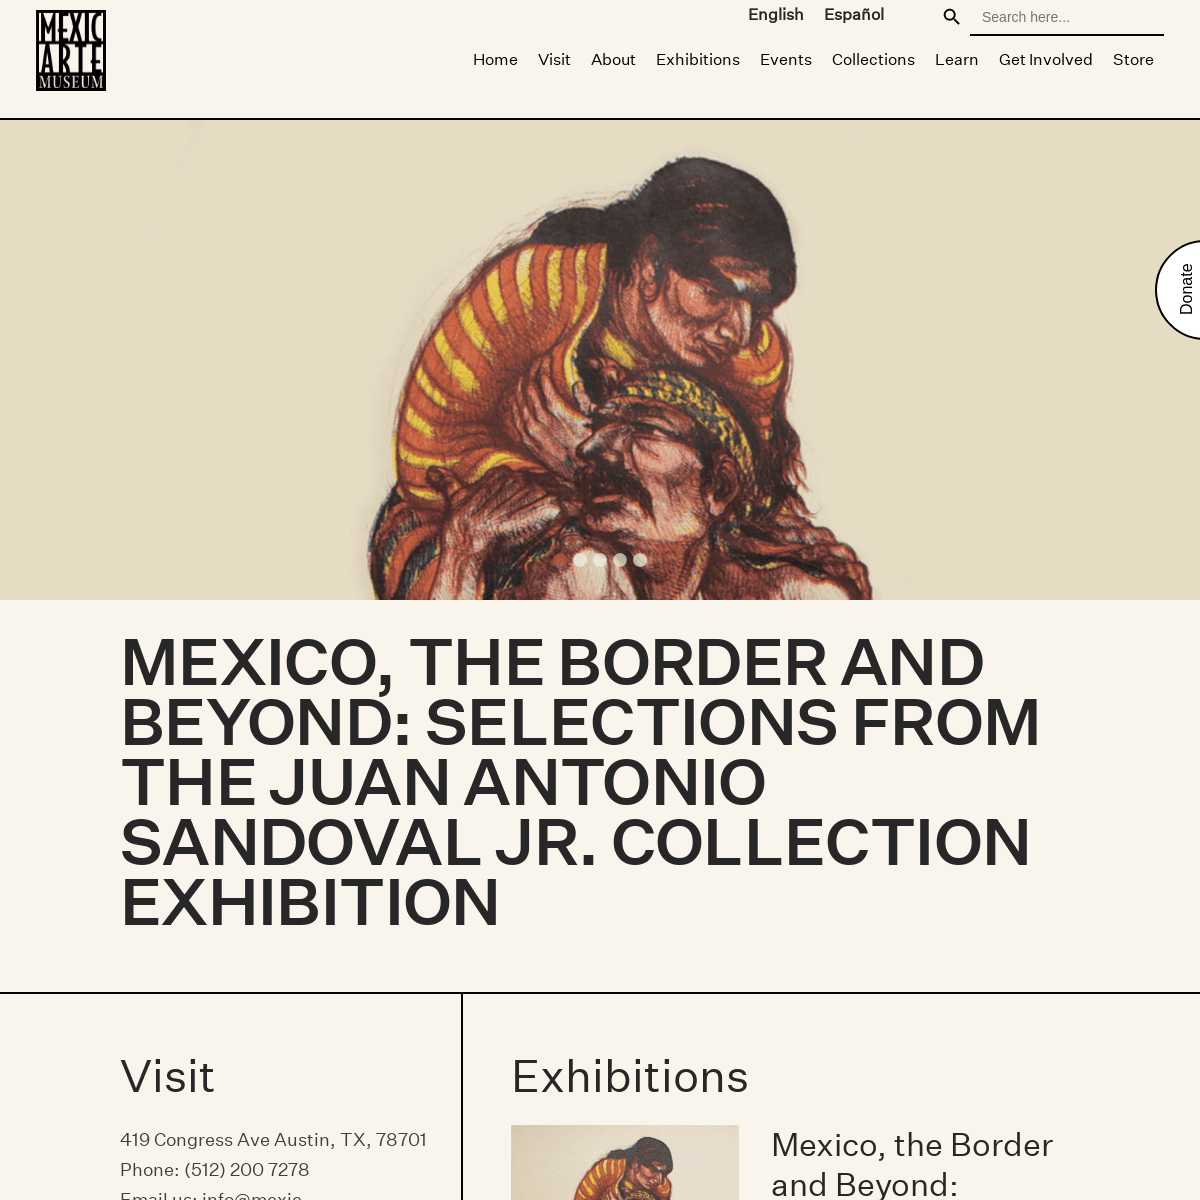 A complete backup of https://mexic-artemuseum.org